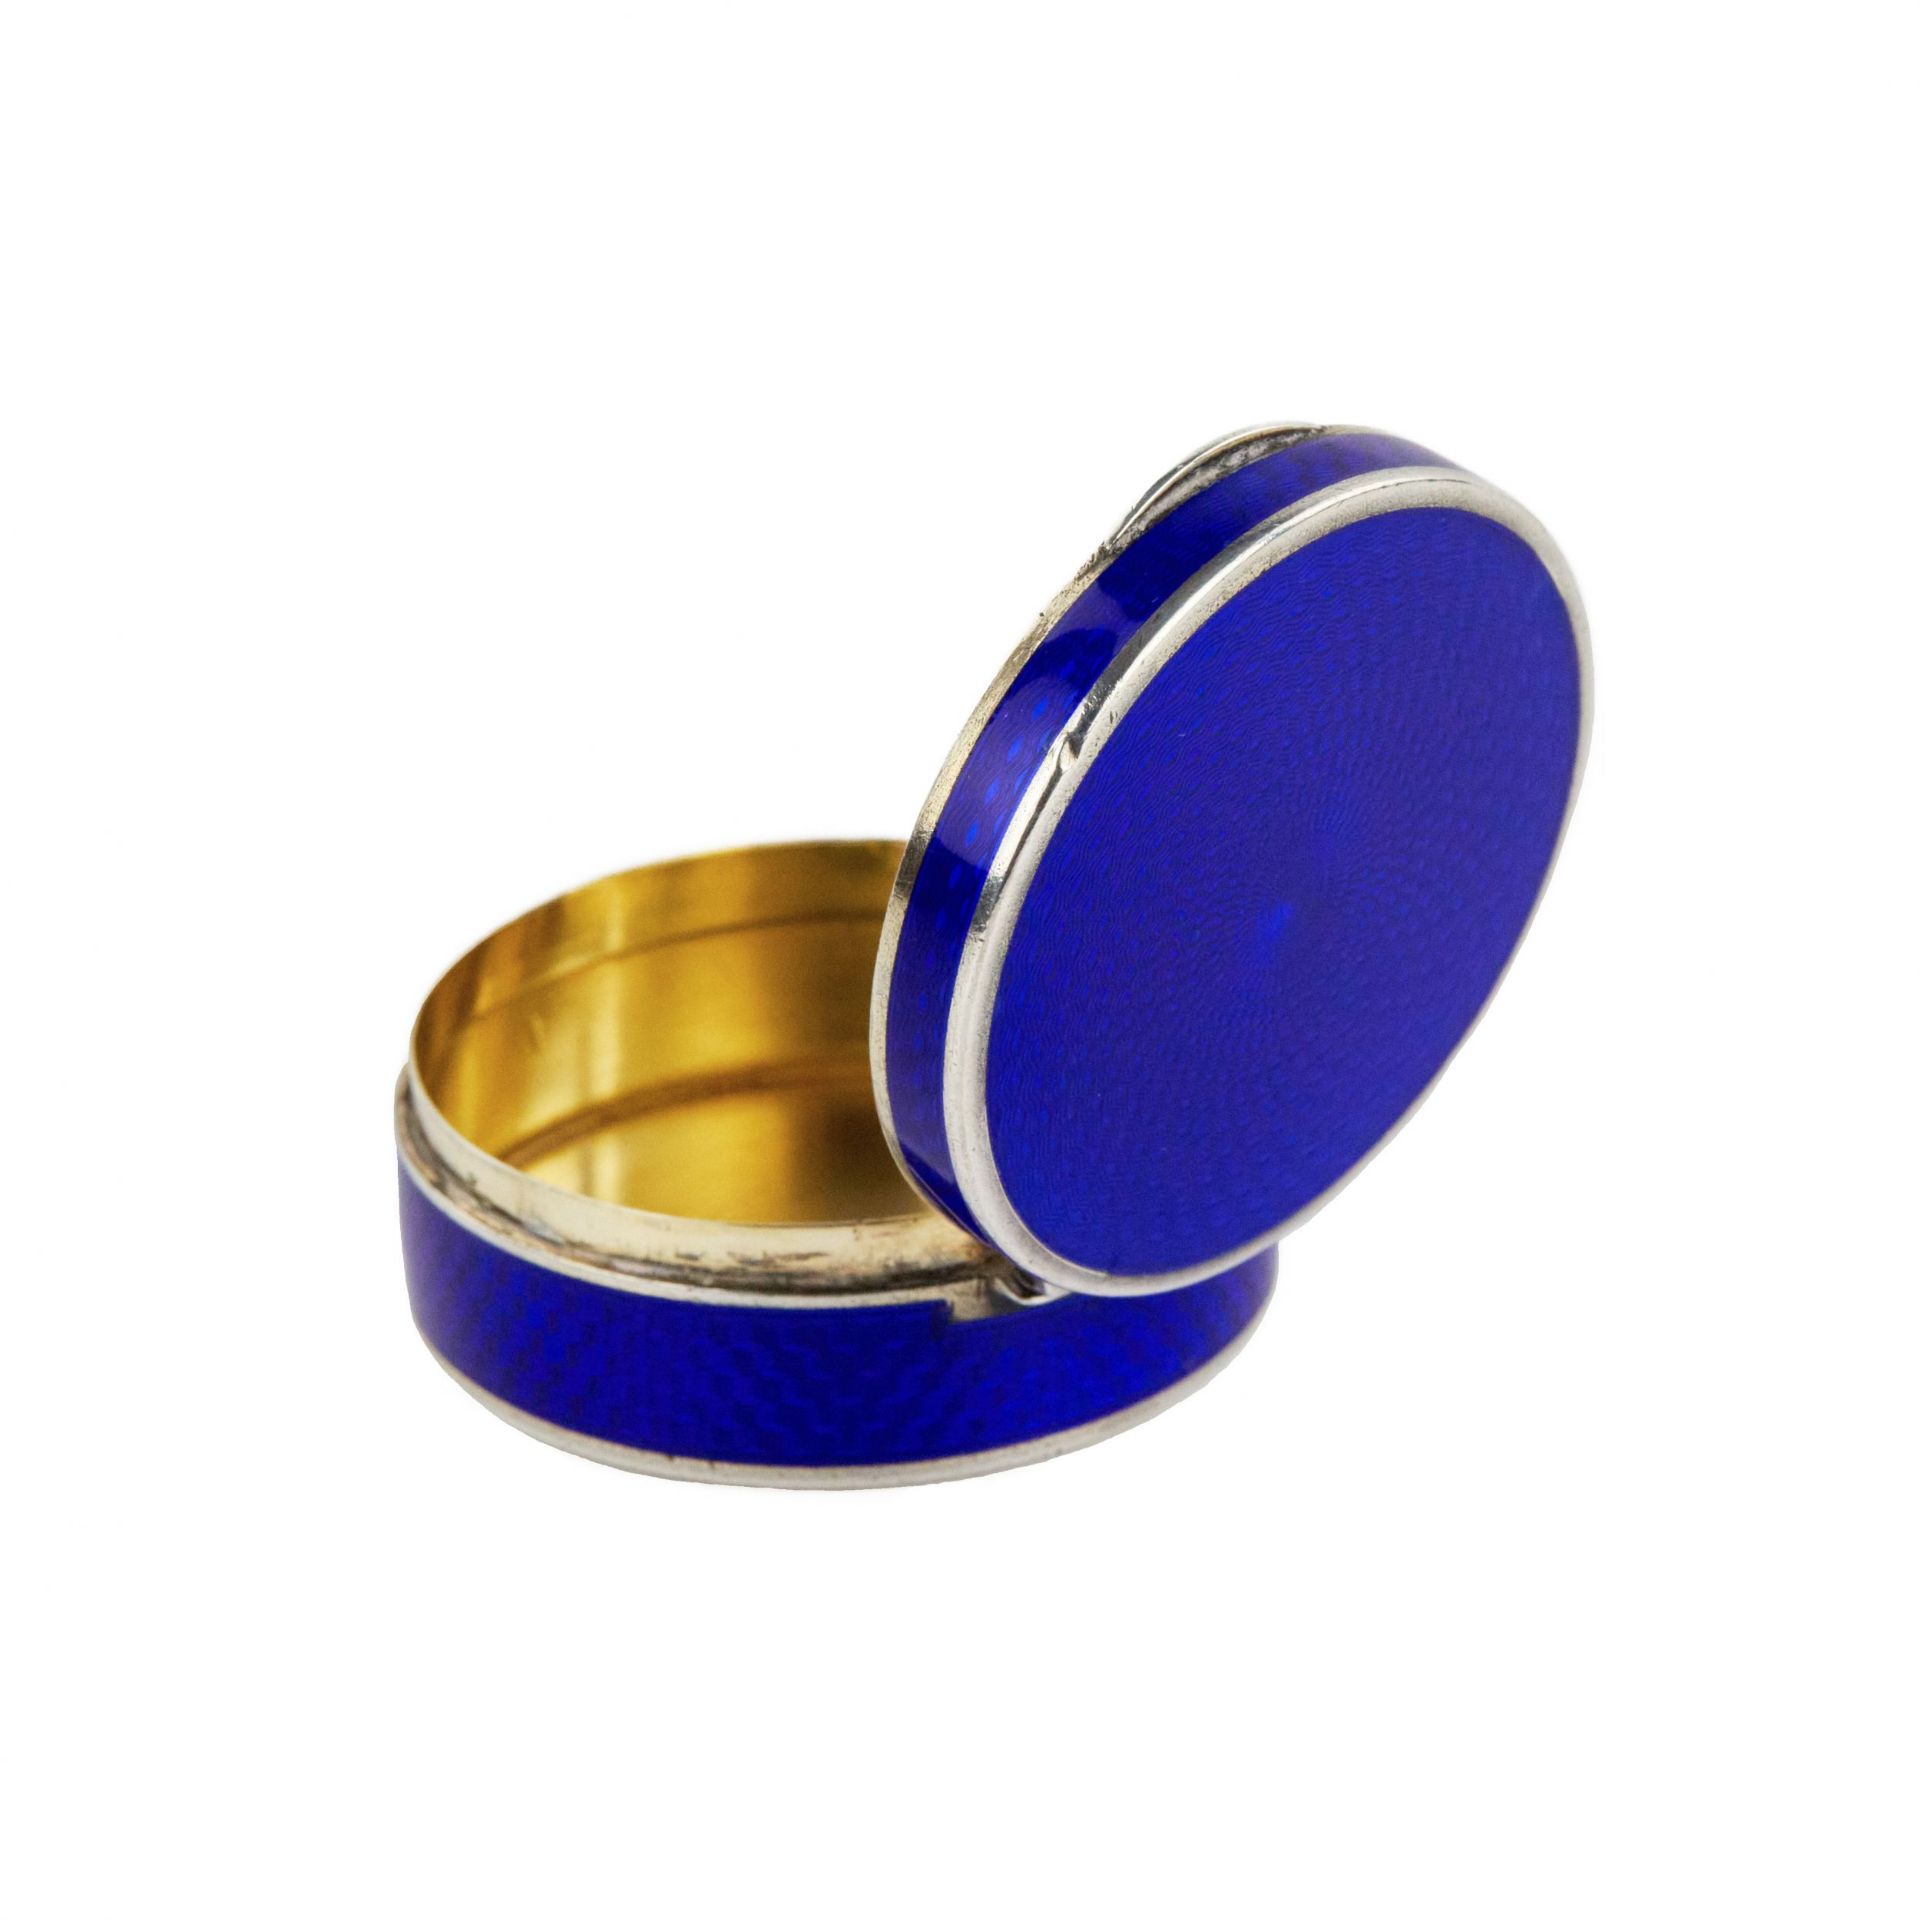 Silver, French mussel in cobalt blue guilloche enamel. - Image 5 of 6